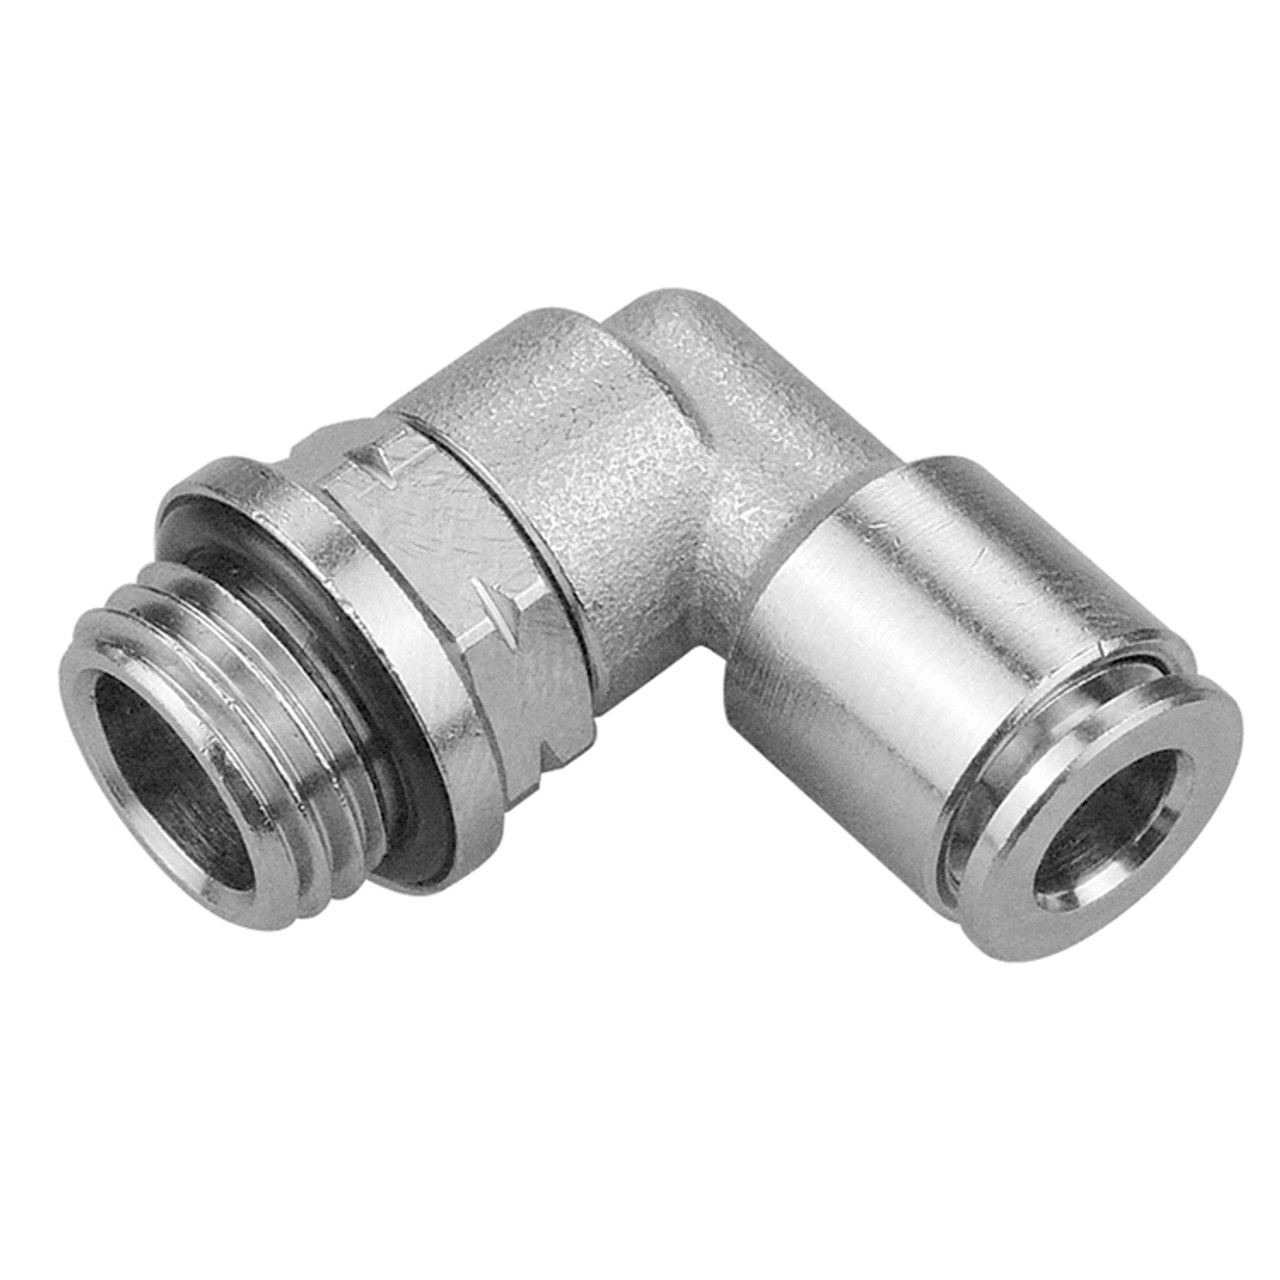 1/2 x 1/2" Nickel Plated Brass Uni Thread - Push-To-Connect 90° Elbow   G60918P-08-08